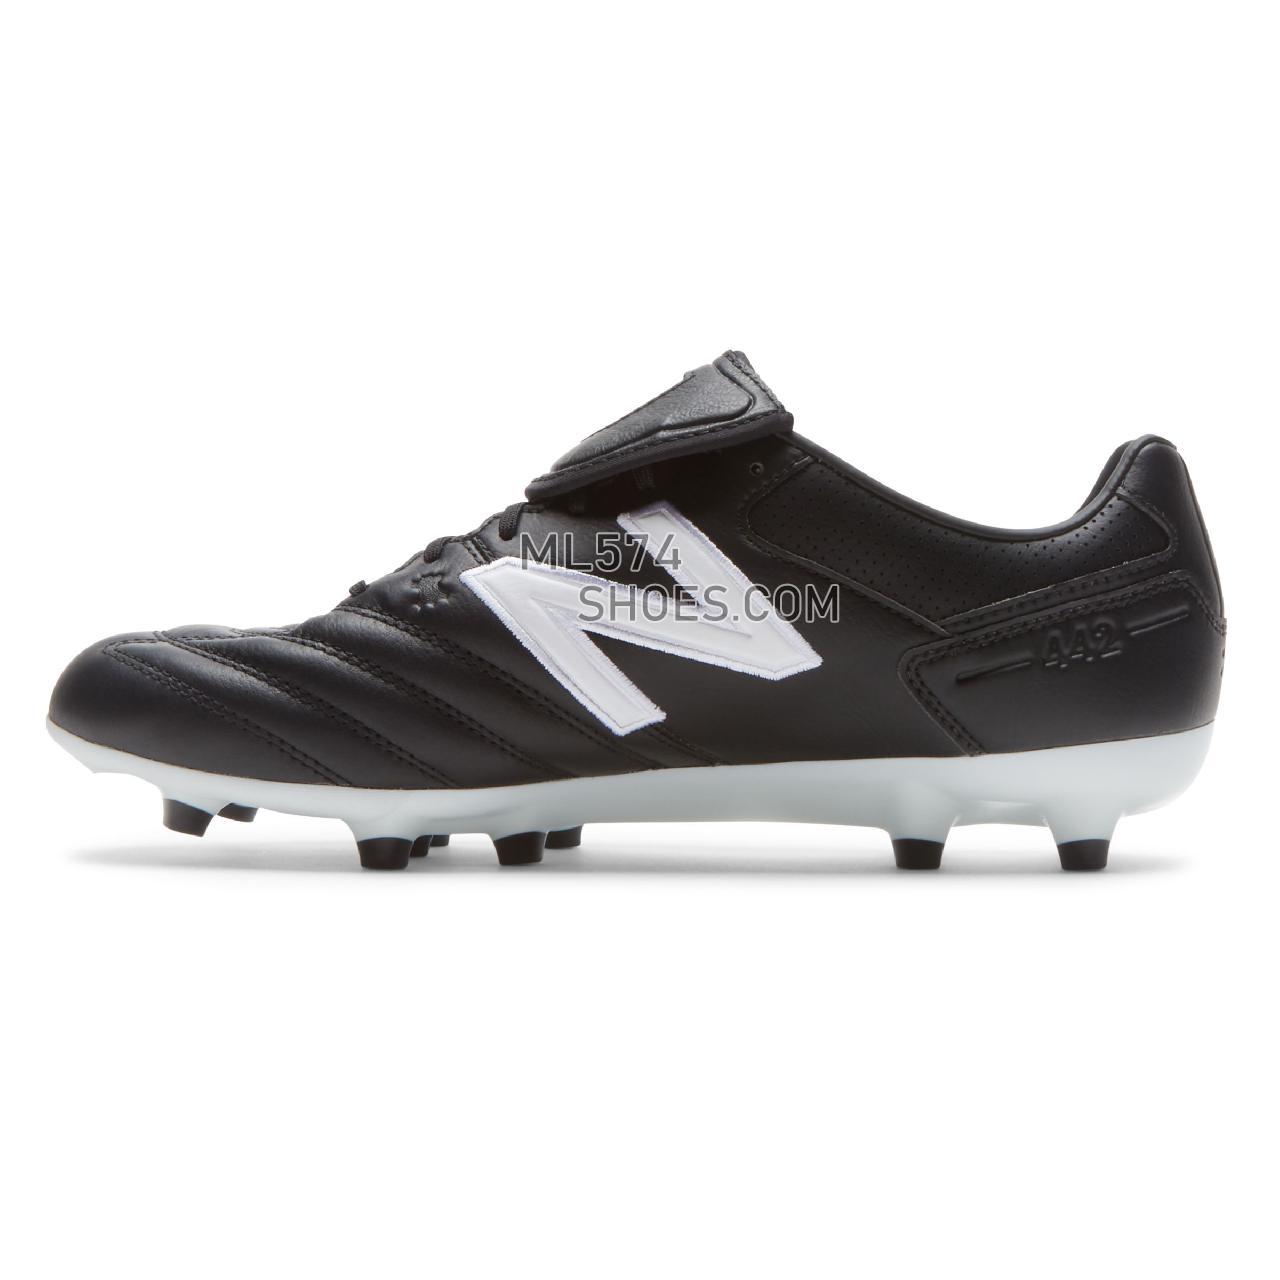 New Balance 442 Pro FG - Men's 1 - Soccer Black with White and Red - MSCKFBW1